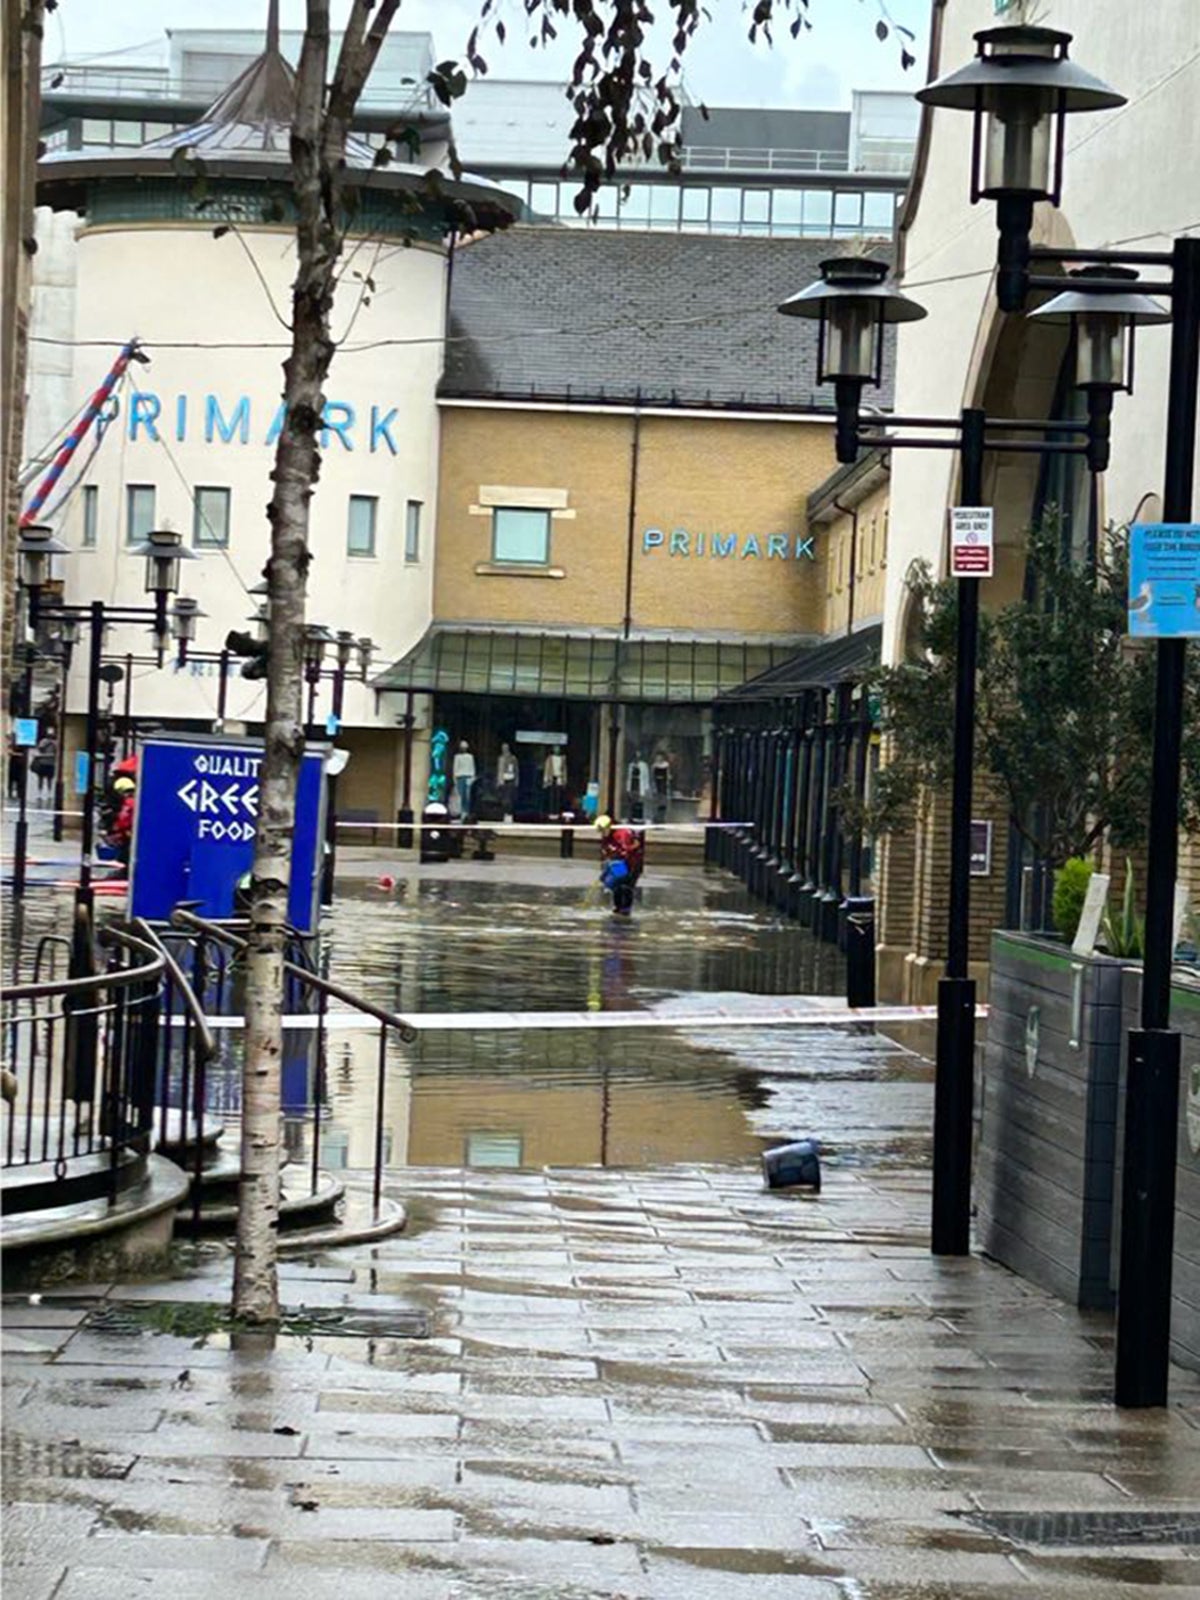 Shopping centre evacuated due to flooding as Met Office issues weekend weather warnings